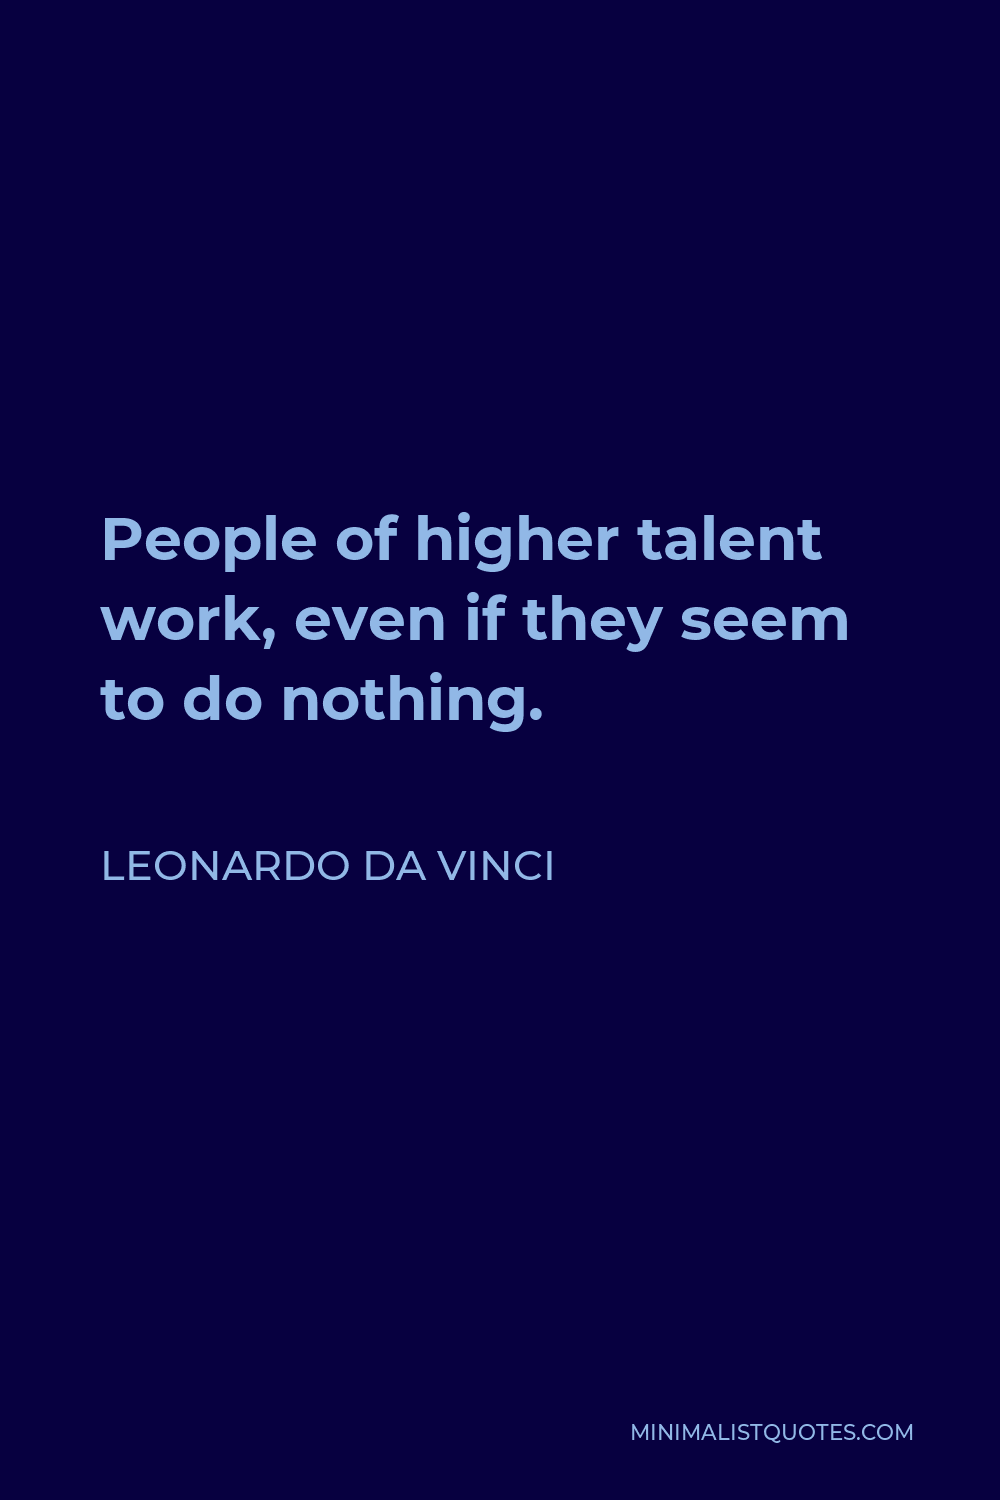 Leonardo da Vinci Quote - People of higher talent work, even if they seem to do nothing.